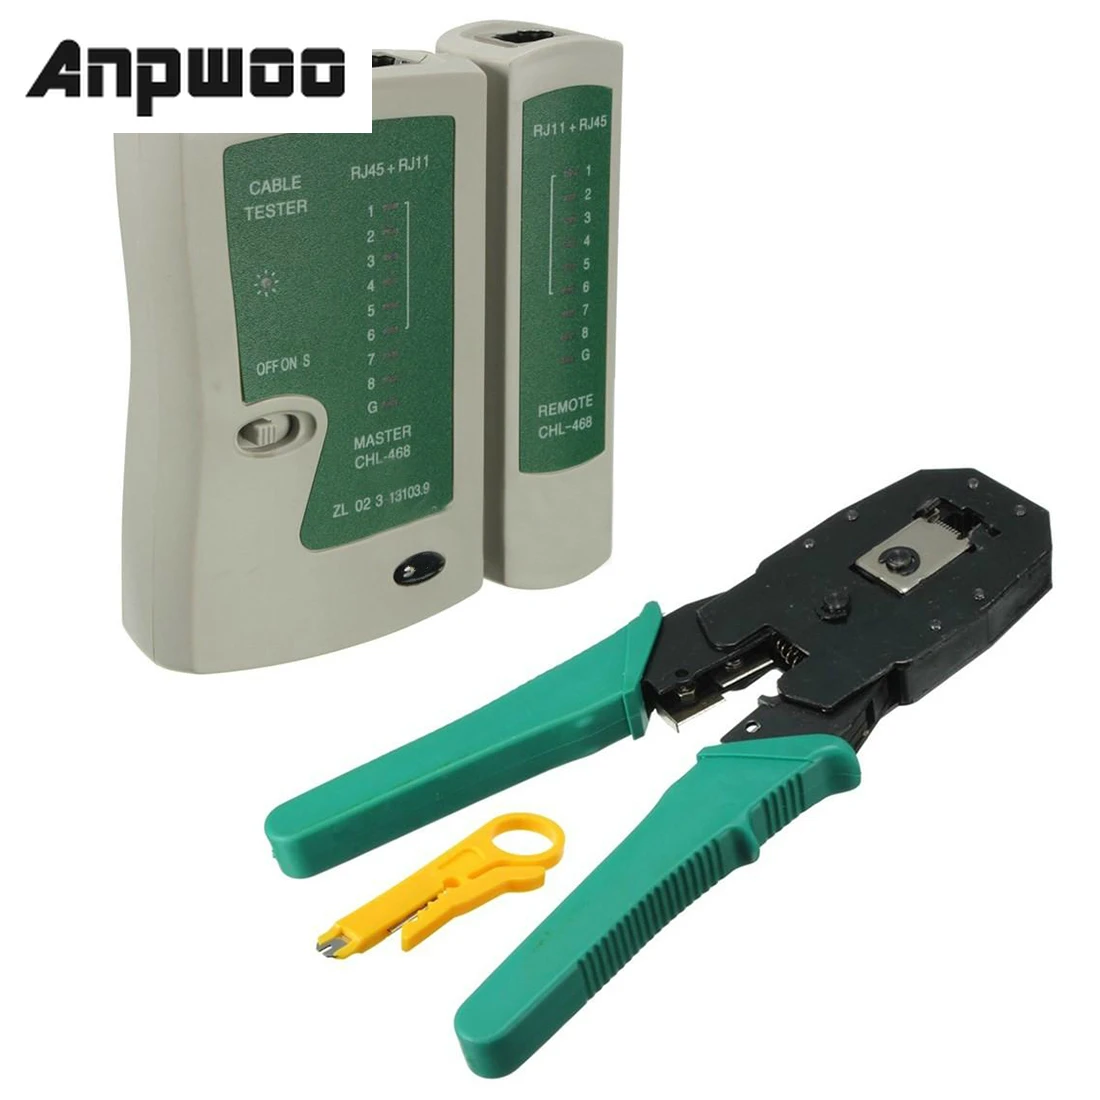 

ANPWOO Professional Network Cable Tester Lan rj45 rj11 with Wire Cable Crimper Crimp PC Network Hand Tools Herramientas